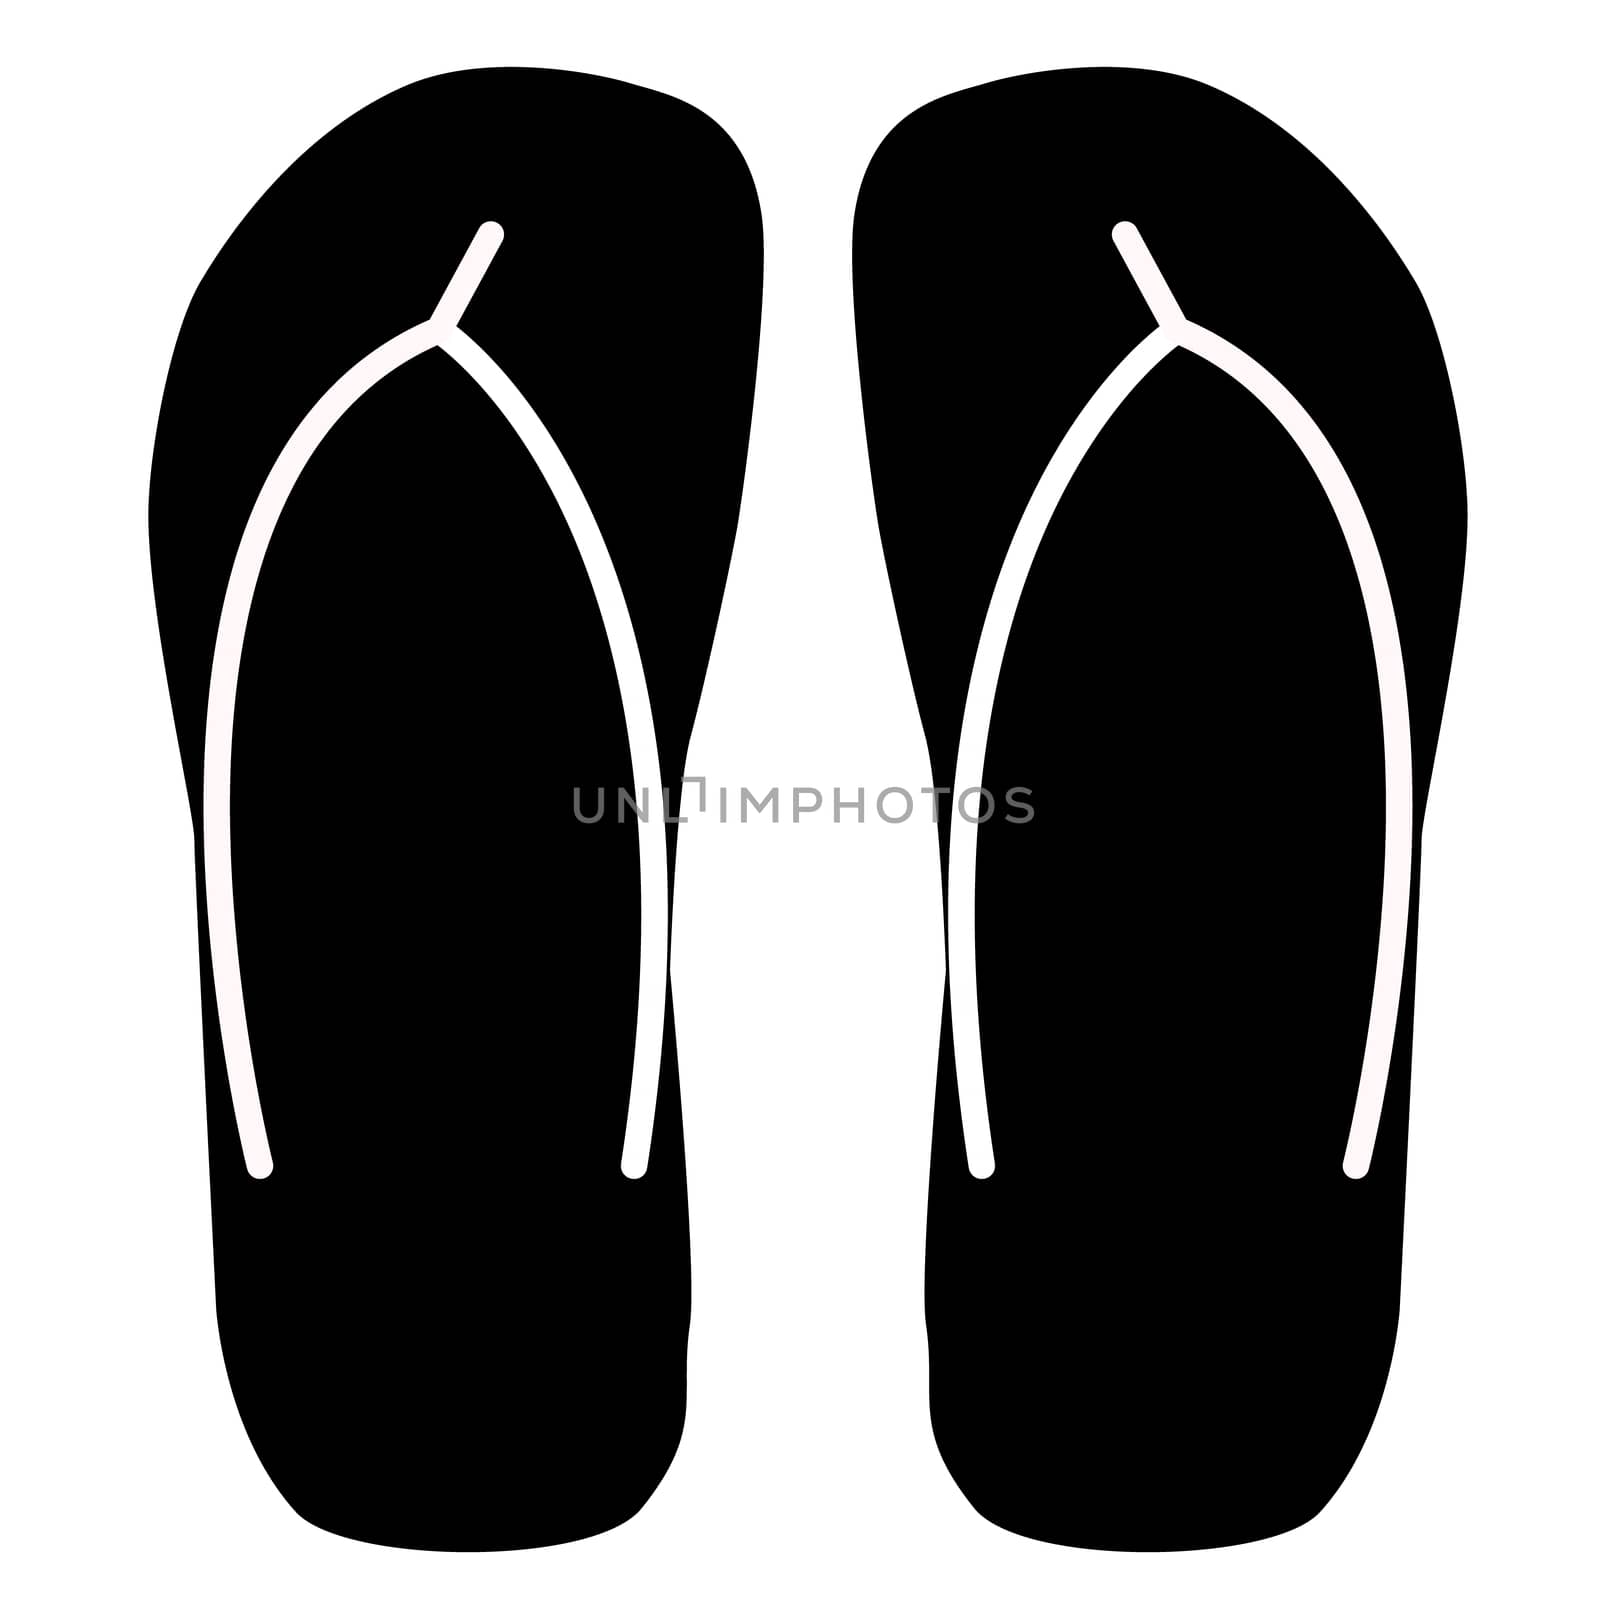 beach slippers icon on white background. beach slippers icon sig by suthee